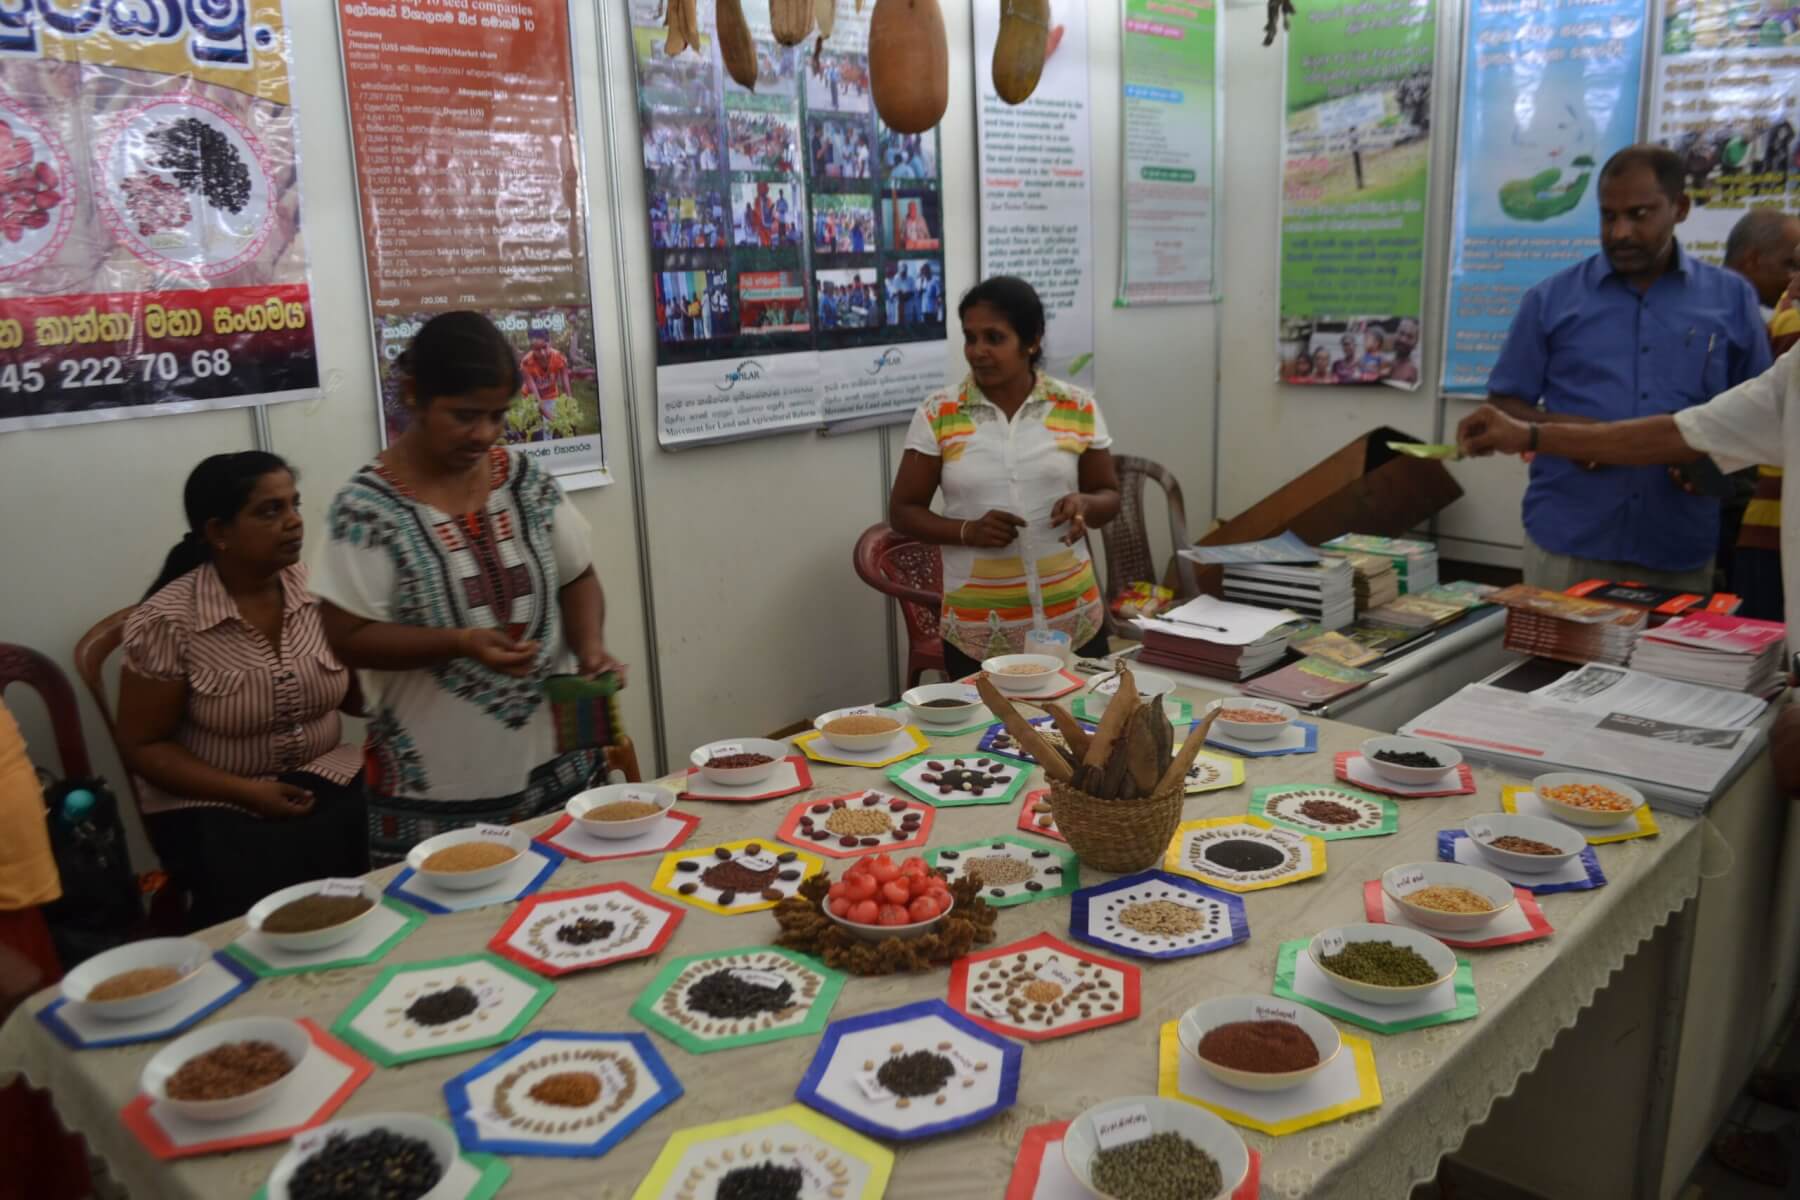 Seeds should not be privatized by companies, indigenous seeds provide good yields and can be re-used year after year. Food security starts at the seeds. © MONLAR